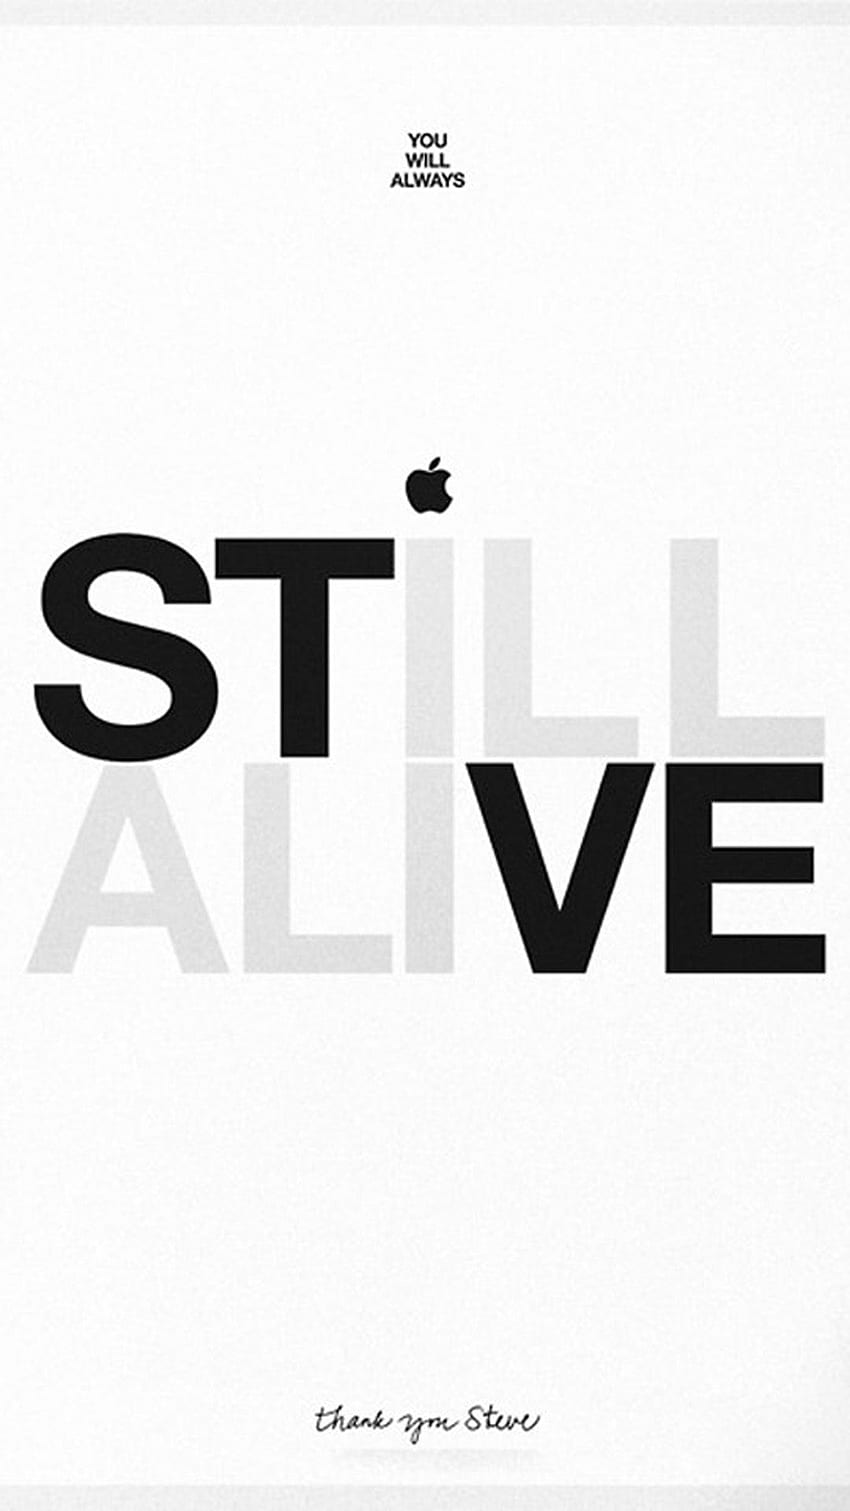 Top 10 Steve Jobs quotes on life and work  iGeeksBlog